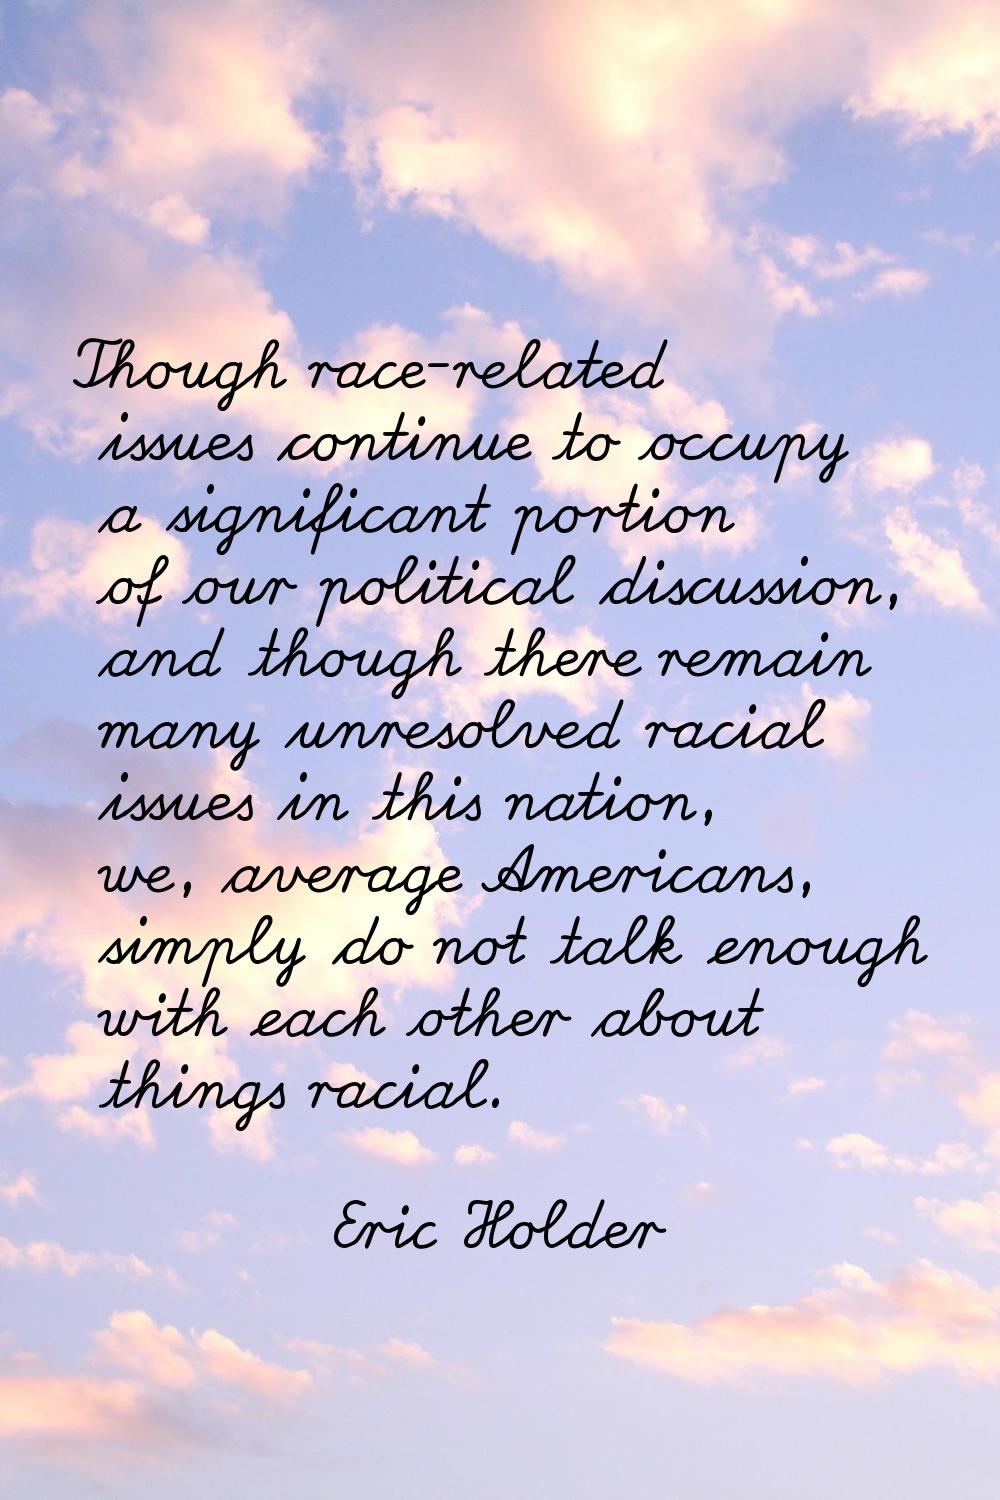 Though race-related issues continue to occupy a significant portion of our political discussion, an